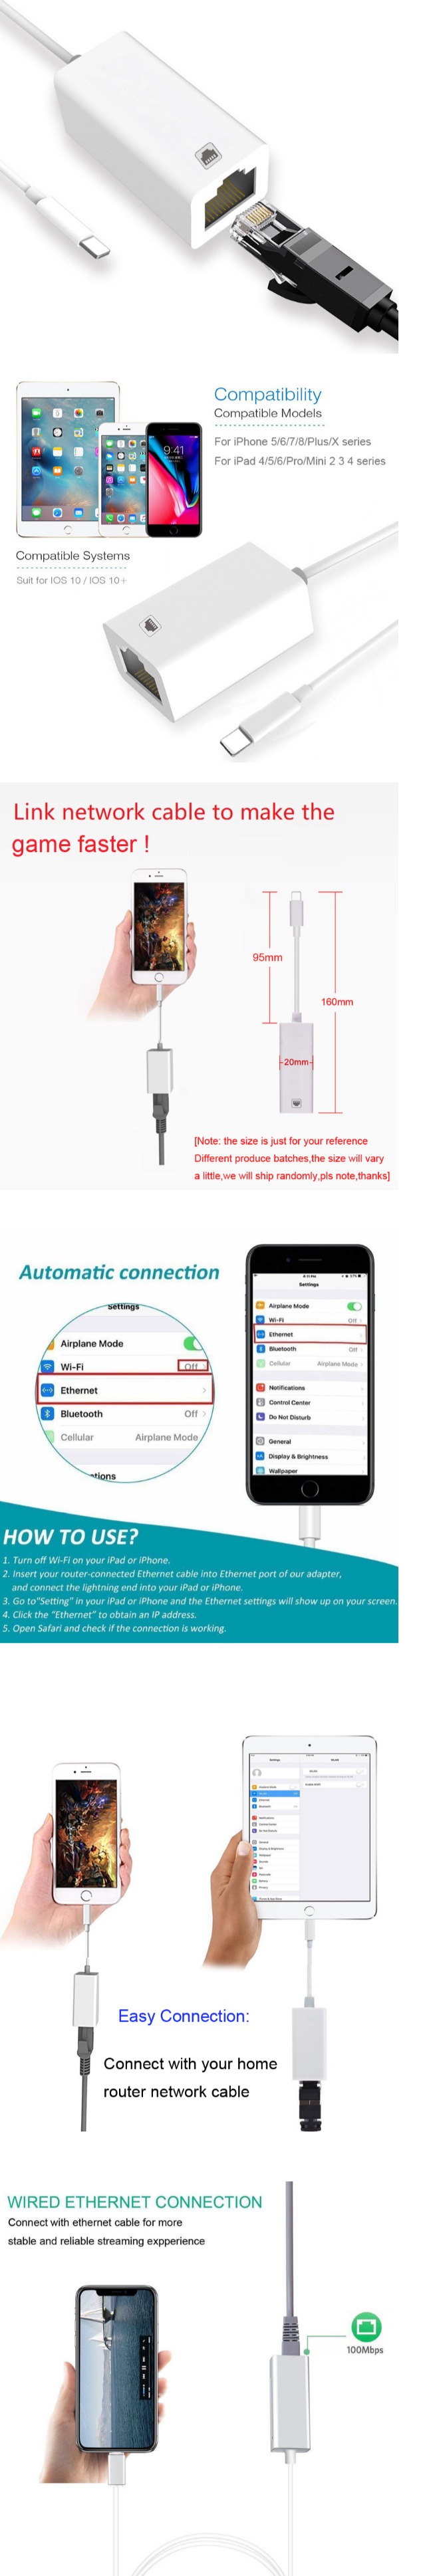 Lightning to RJ45 Adapter, iPhone Wired Network,iPhone RJ45 Adapter,RJ45 Adapter Cable for iPhone,iPhone Internet Adapter,iPhone Lan Adapte,China OEM Manufacturer,China OEM Factory